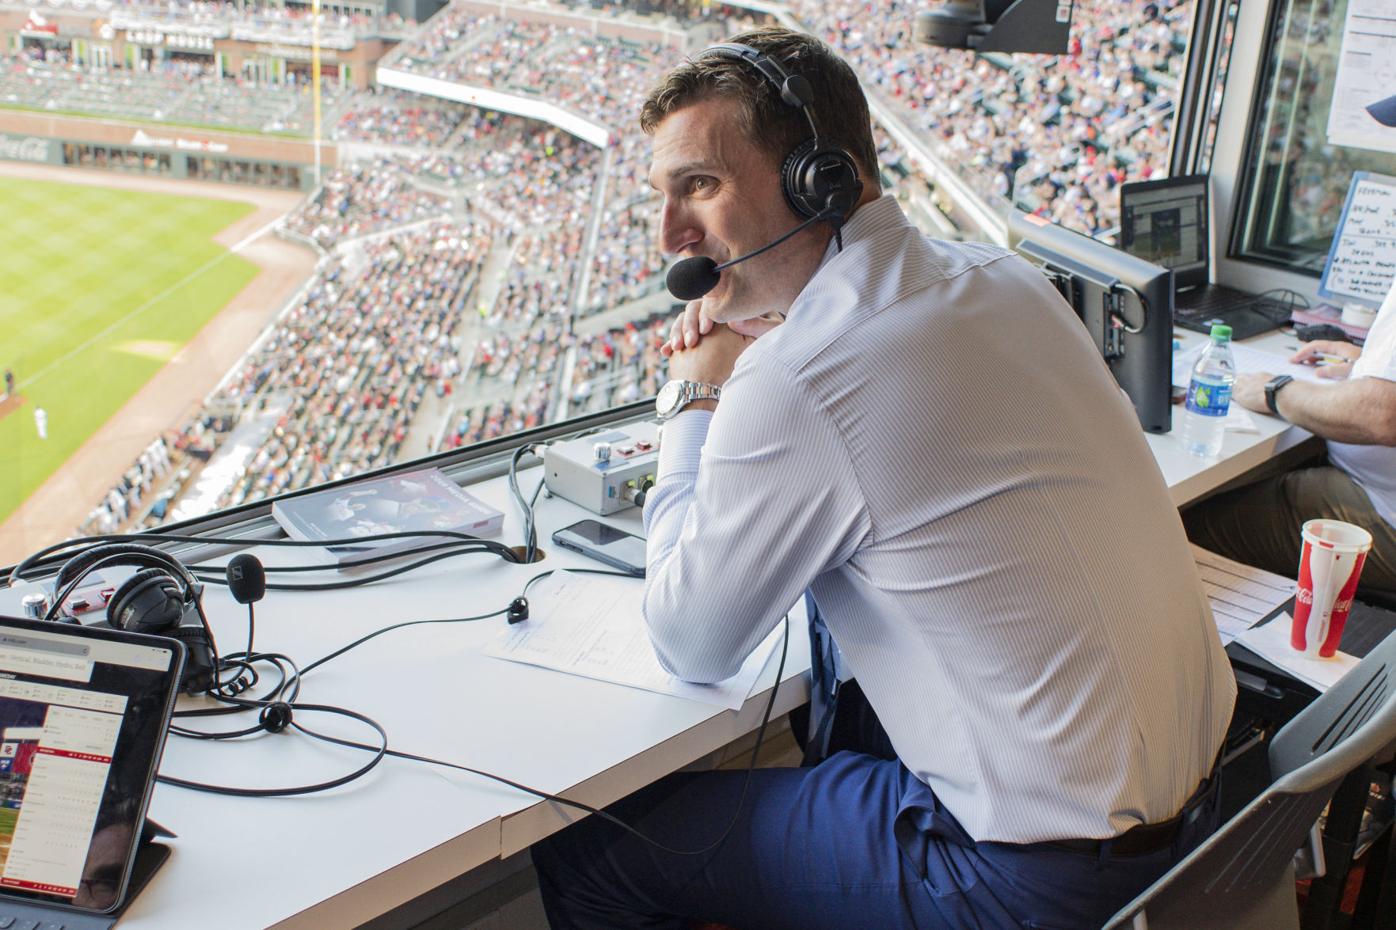 PHOTOS: Parkview grad Jeff Francoeur broadcasts a Braves game on July 2, Multimedia